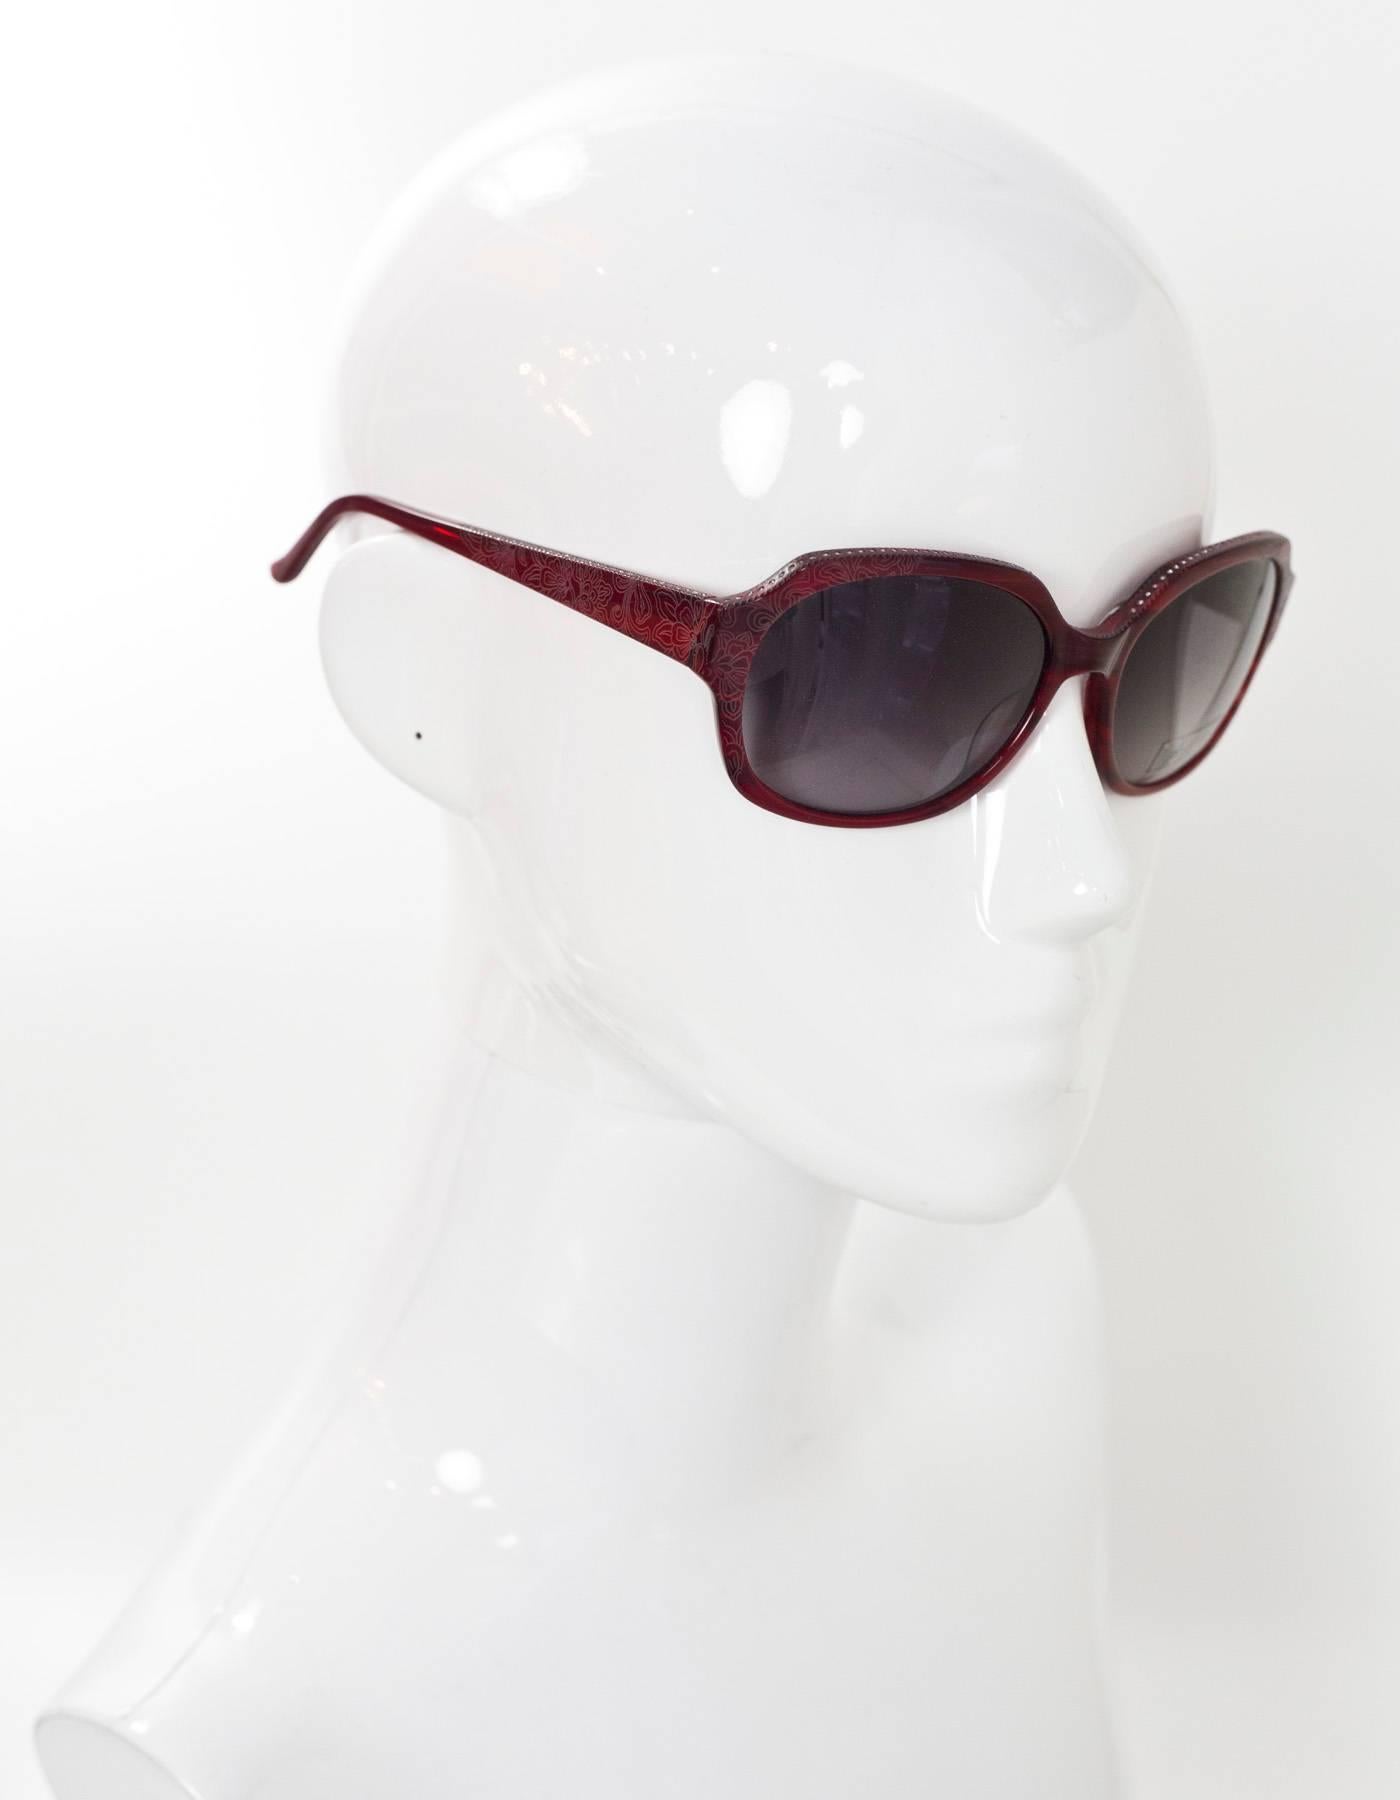 Judith Leiber Red Swarovski Crystal Sunglasses
Features crystals at top of frame and arms and floral laser-etched design

Made In: Japan
Color: Red
Materials: Resin, crystal
Retail Price: $420 + tax
Overall Condition: Excellent pre-owned